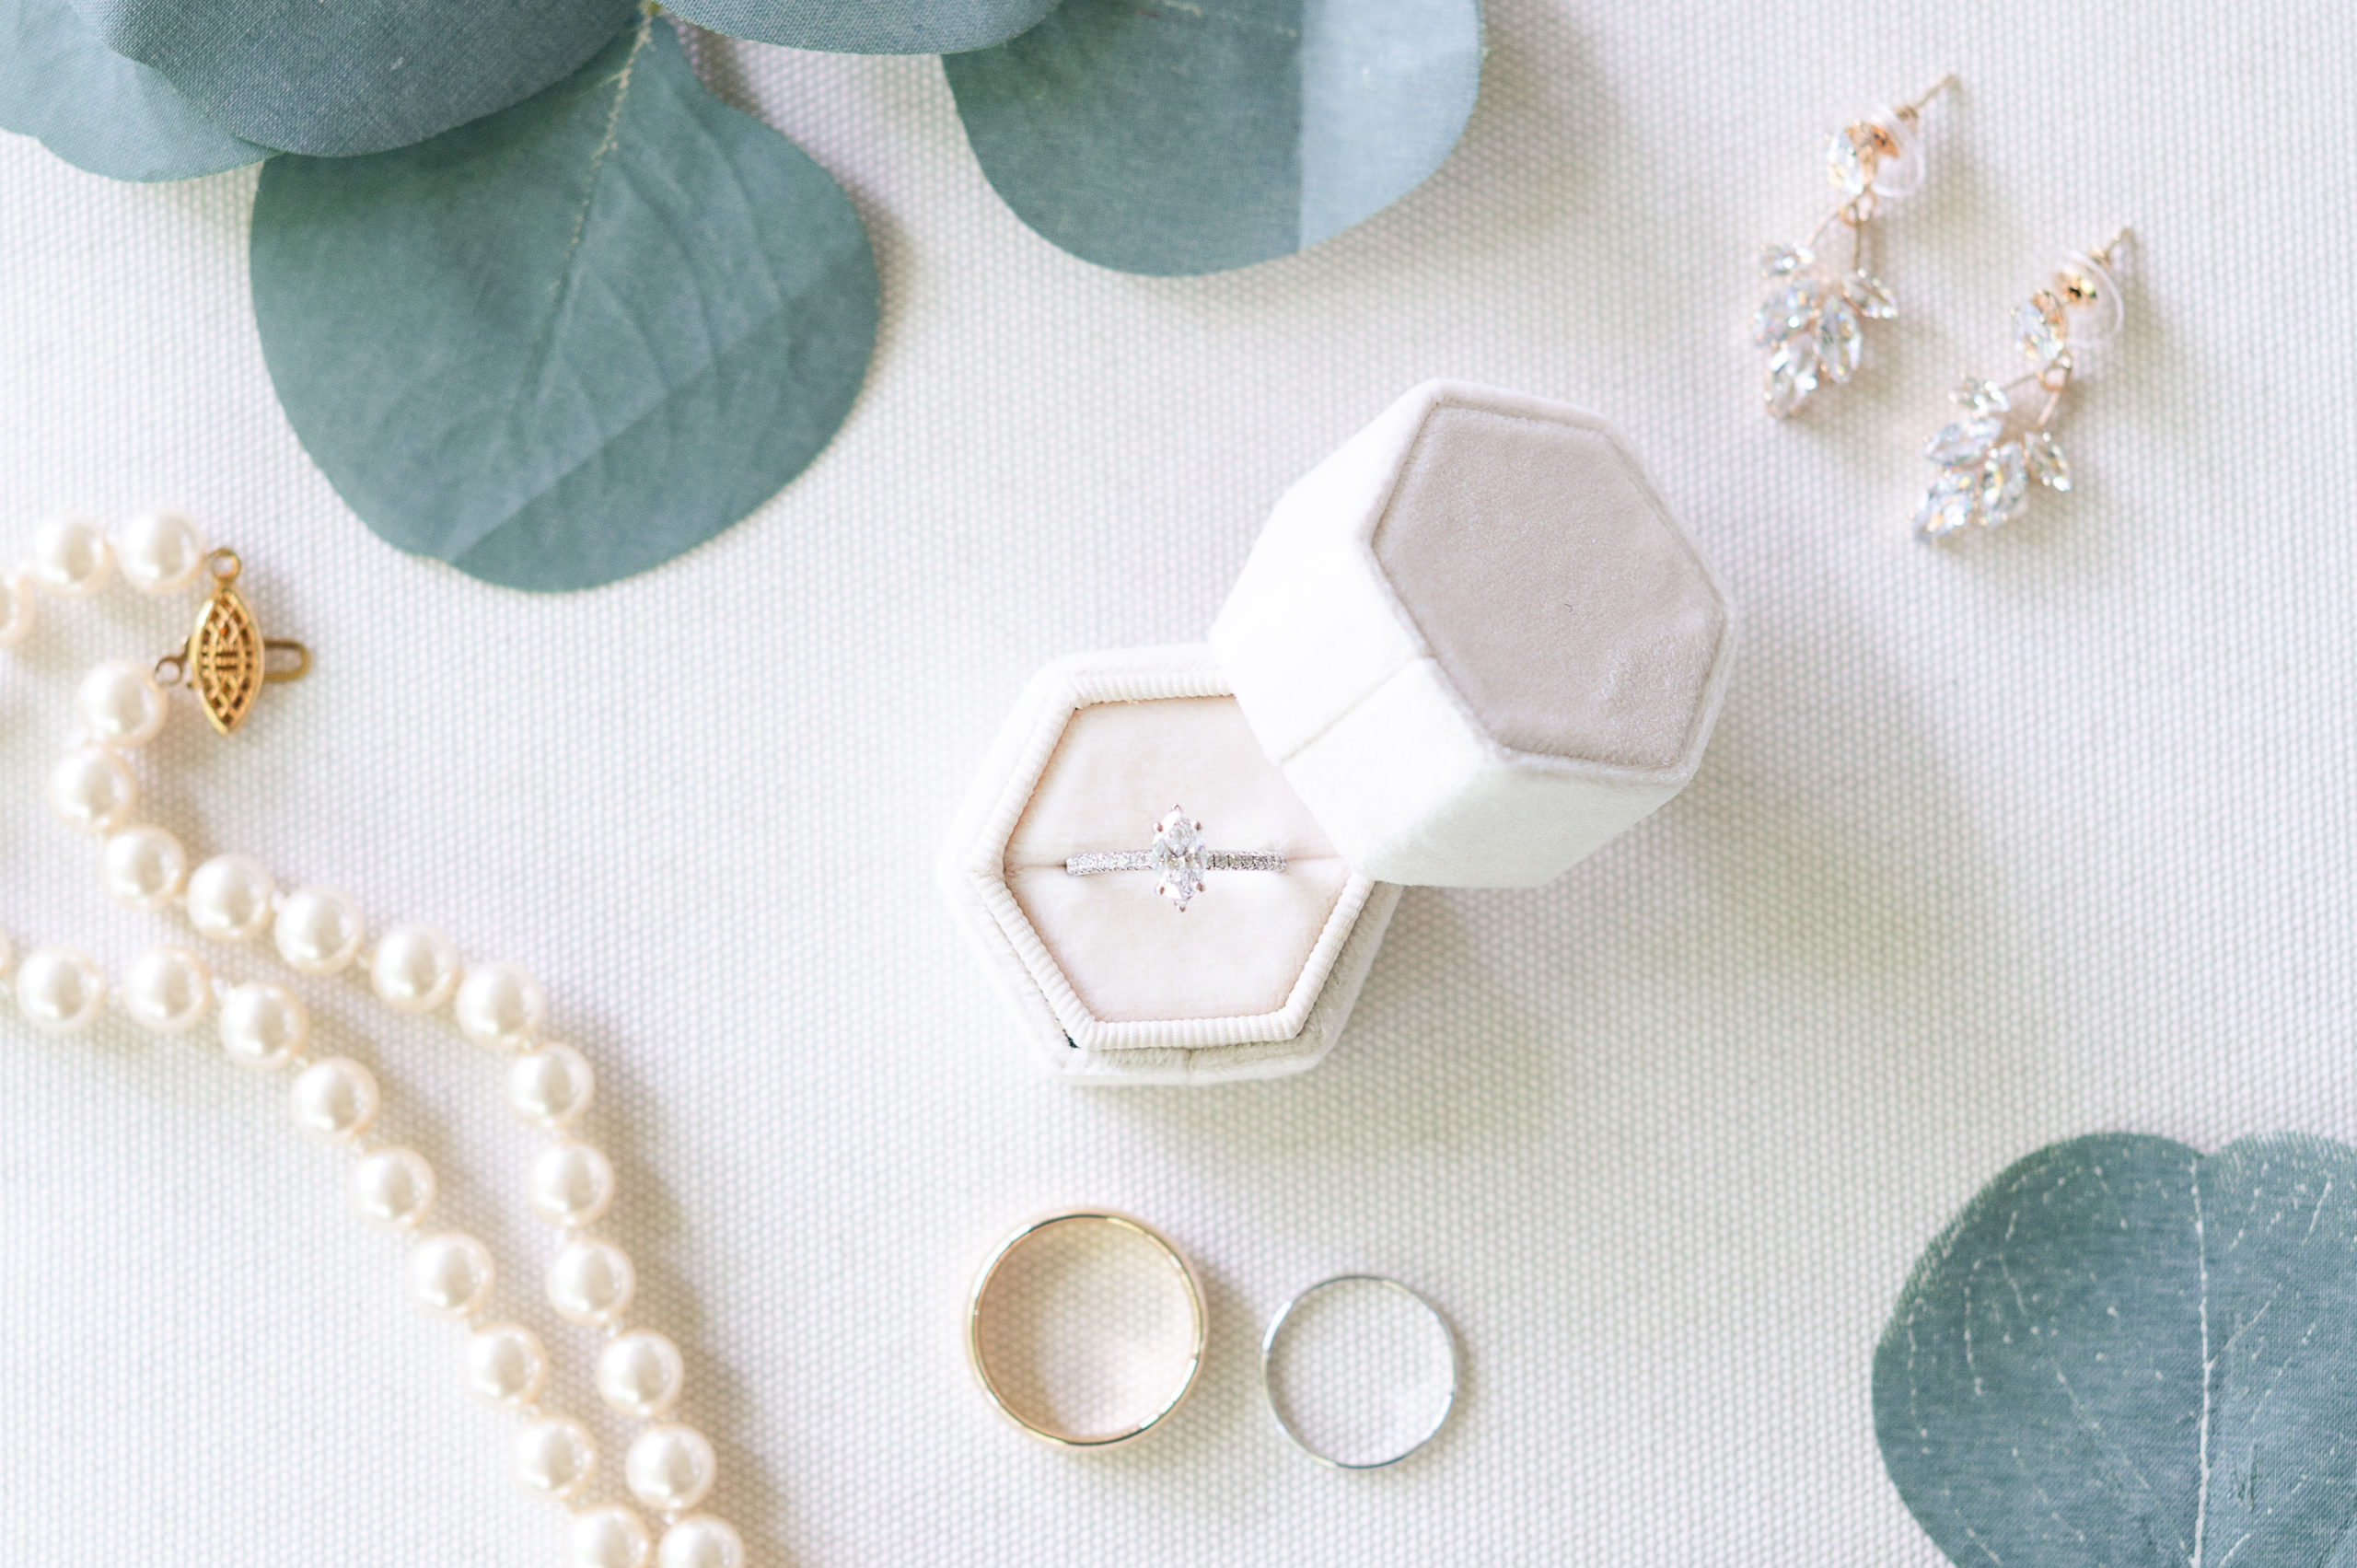 Wedding flat lay with details